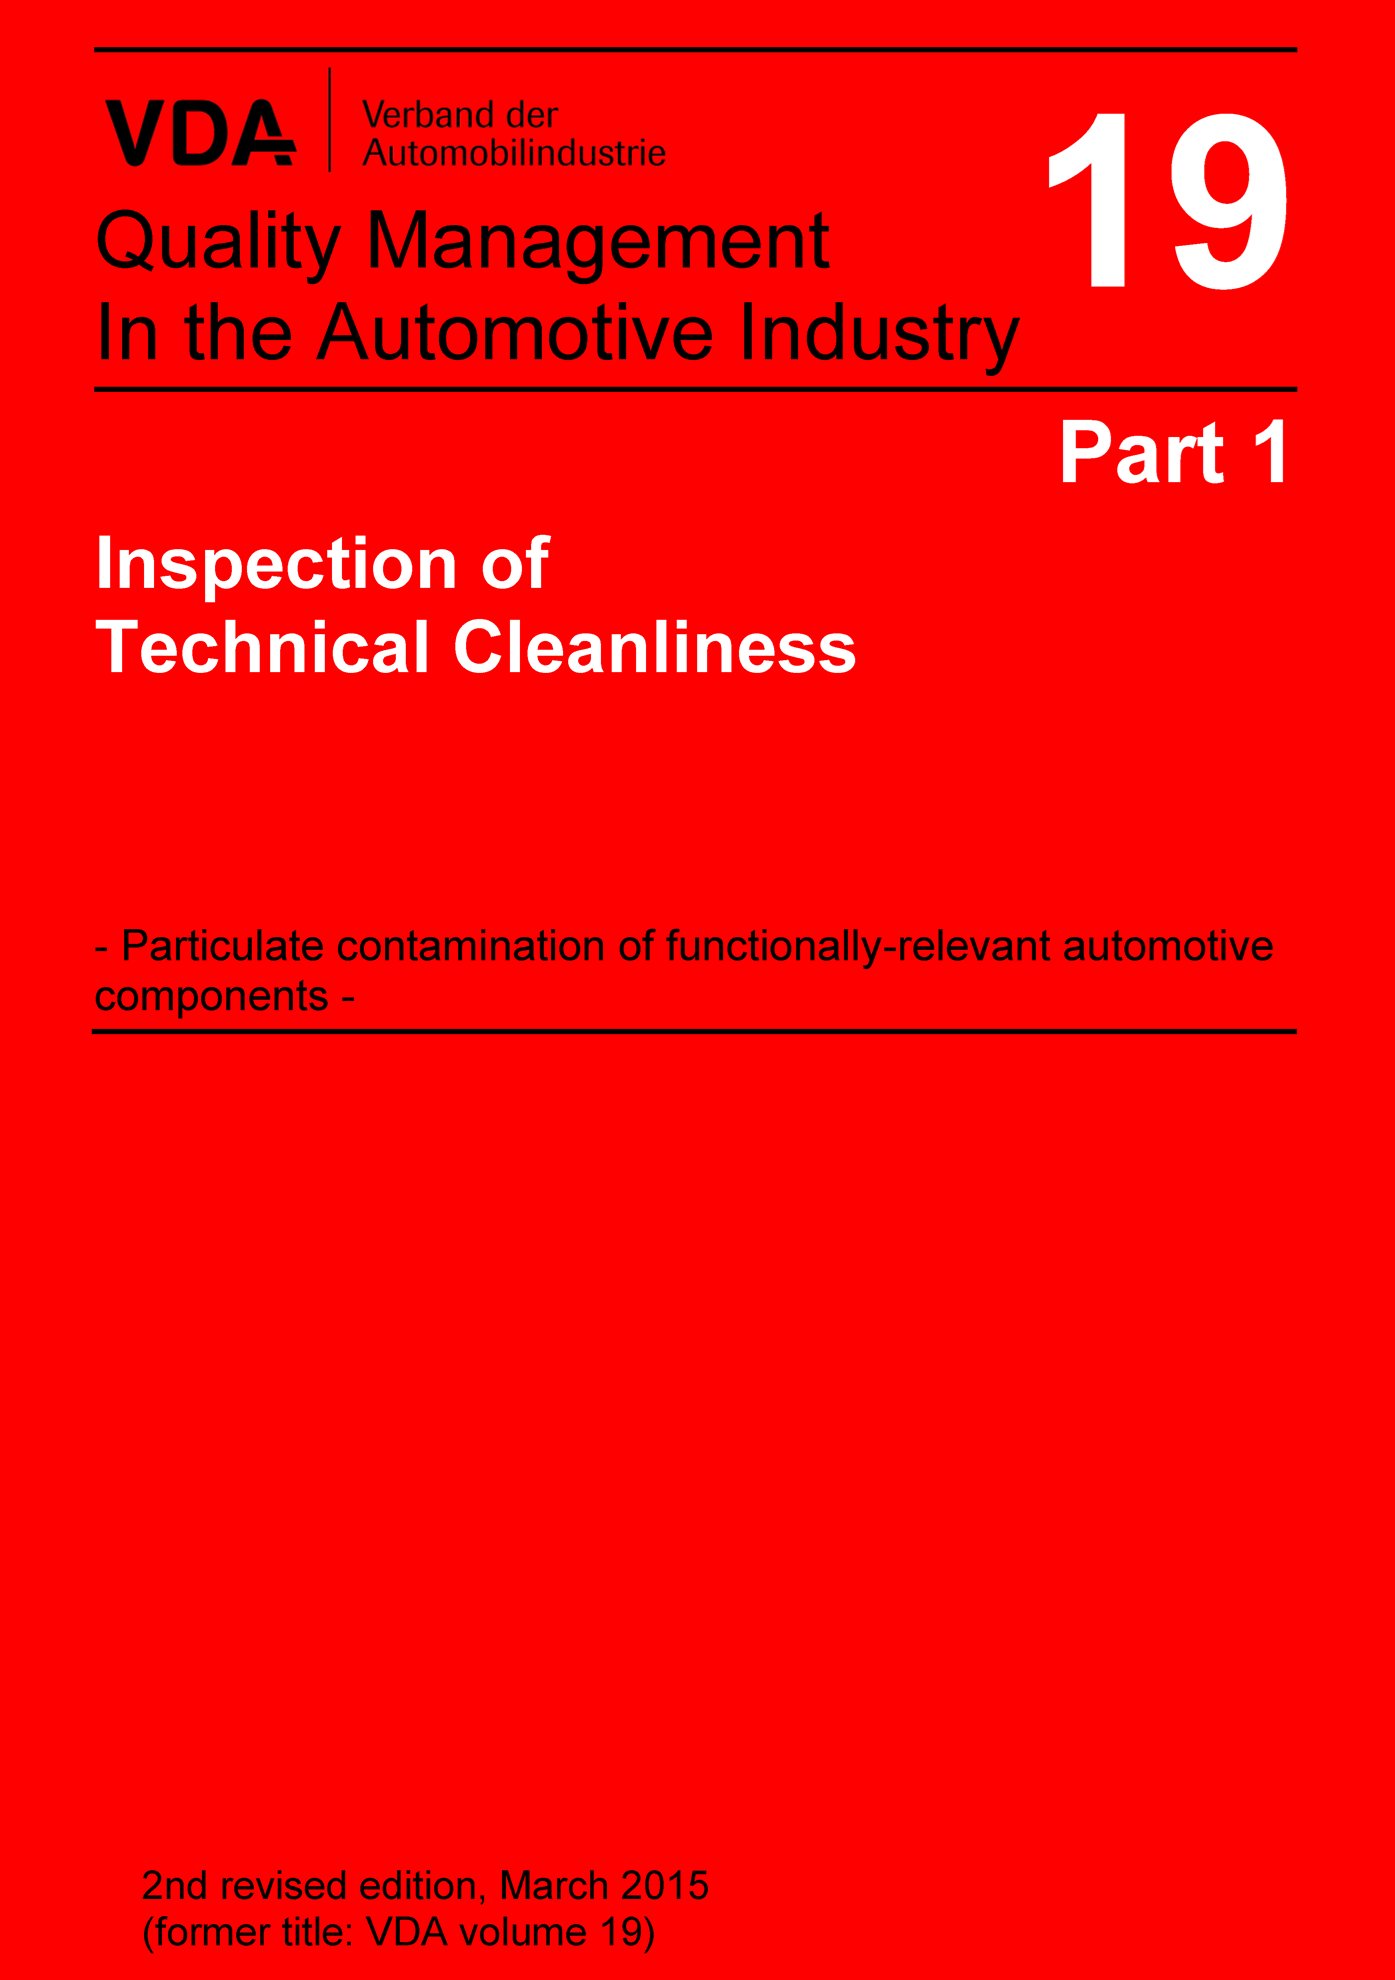 Publikace  VDA Volume 19 Part 1, Inspection of Technical Cleanliness >Particulate Contamination of Functionally Relevant Automotive Components / 2nd Revised Edition, March 2015 (former title: VDA volume 19) 1.3.2015 náhled